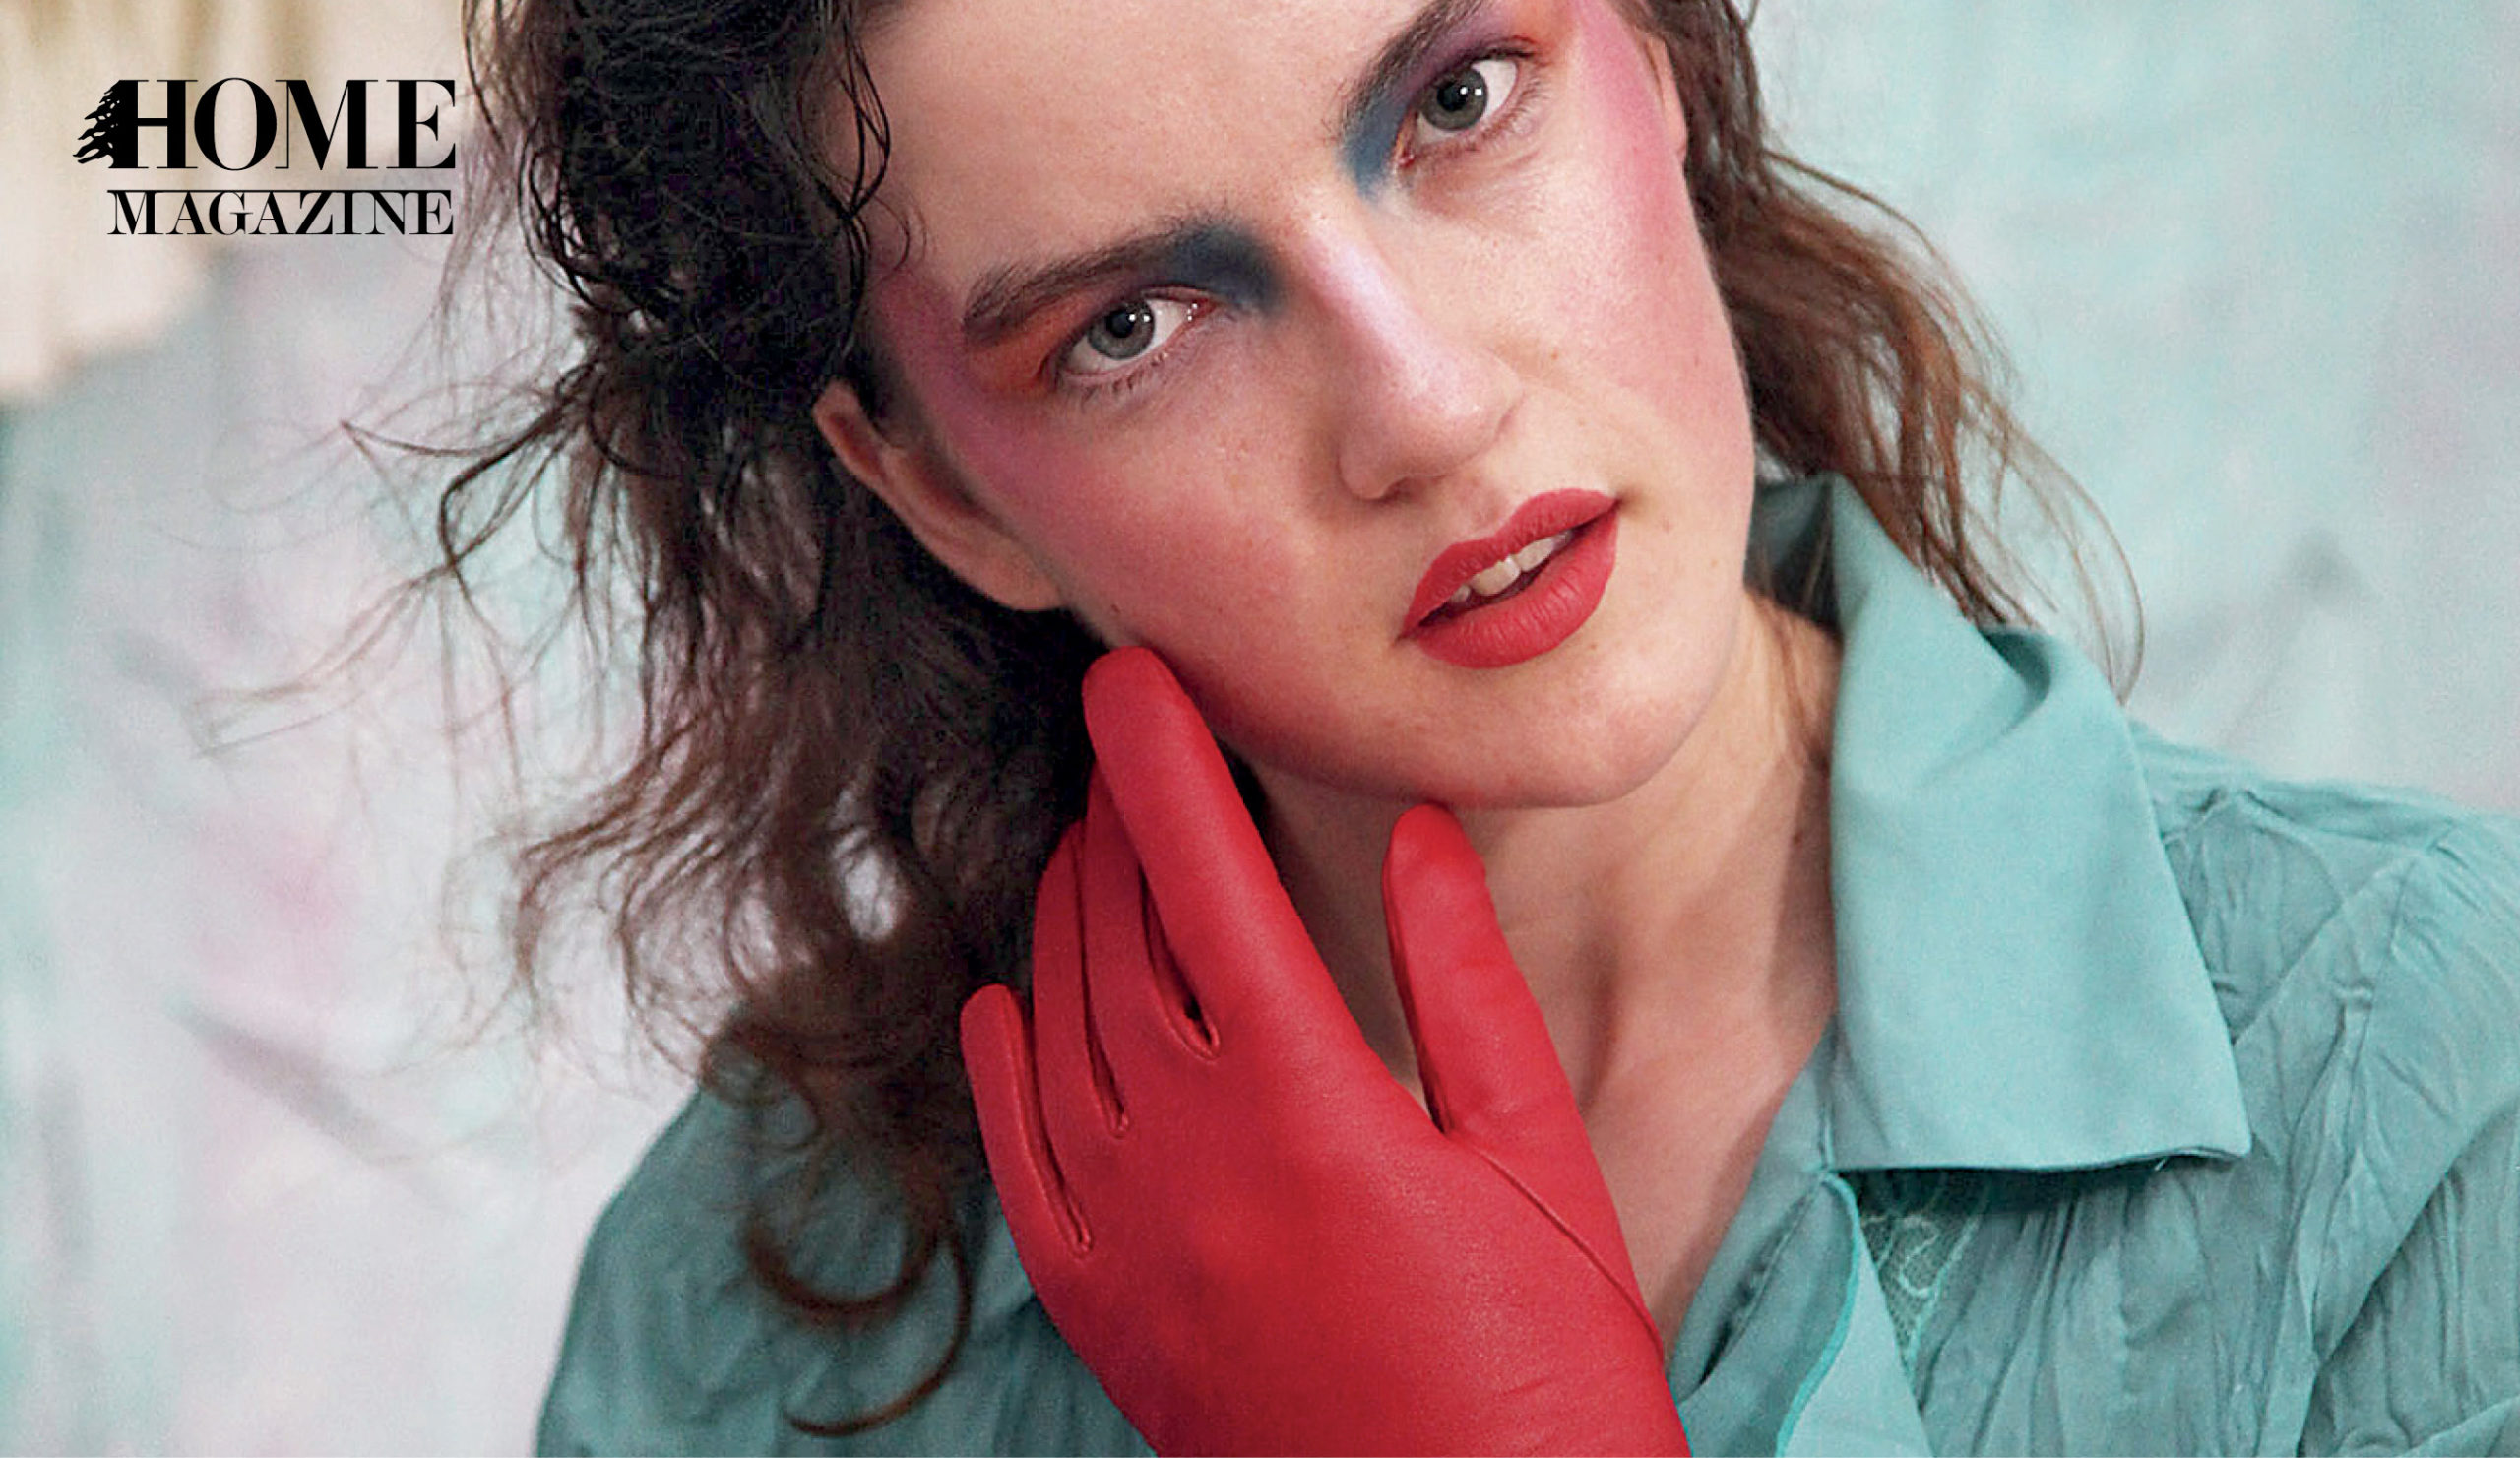 Face portrait of a woman with makeup, a red glove and a blue shirt